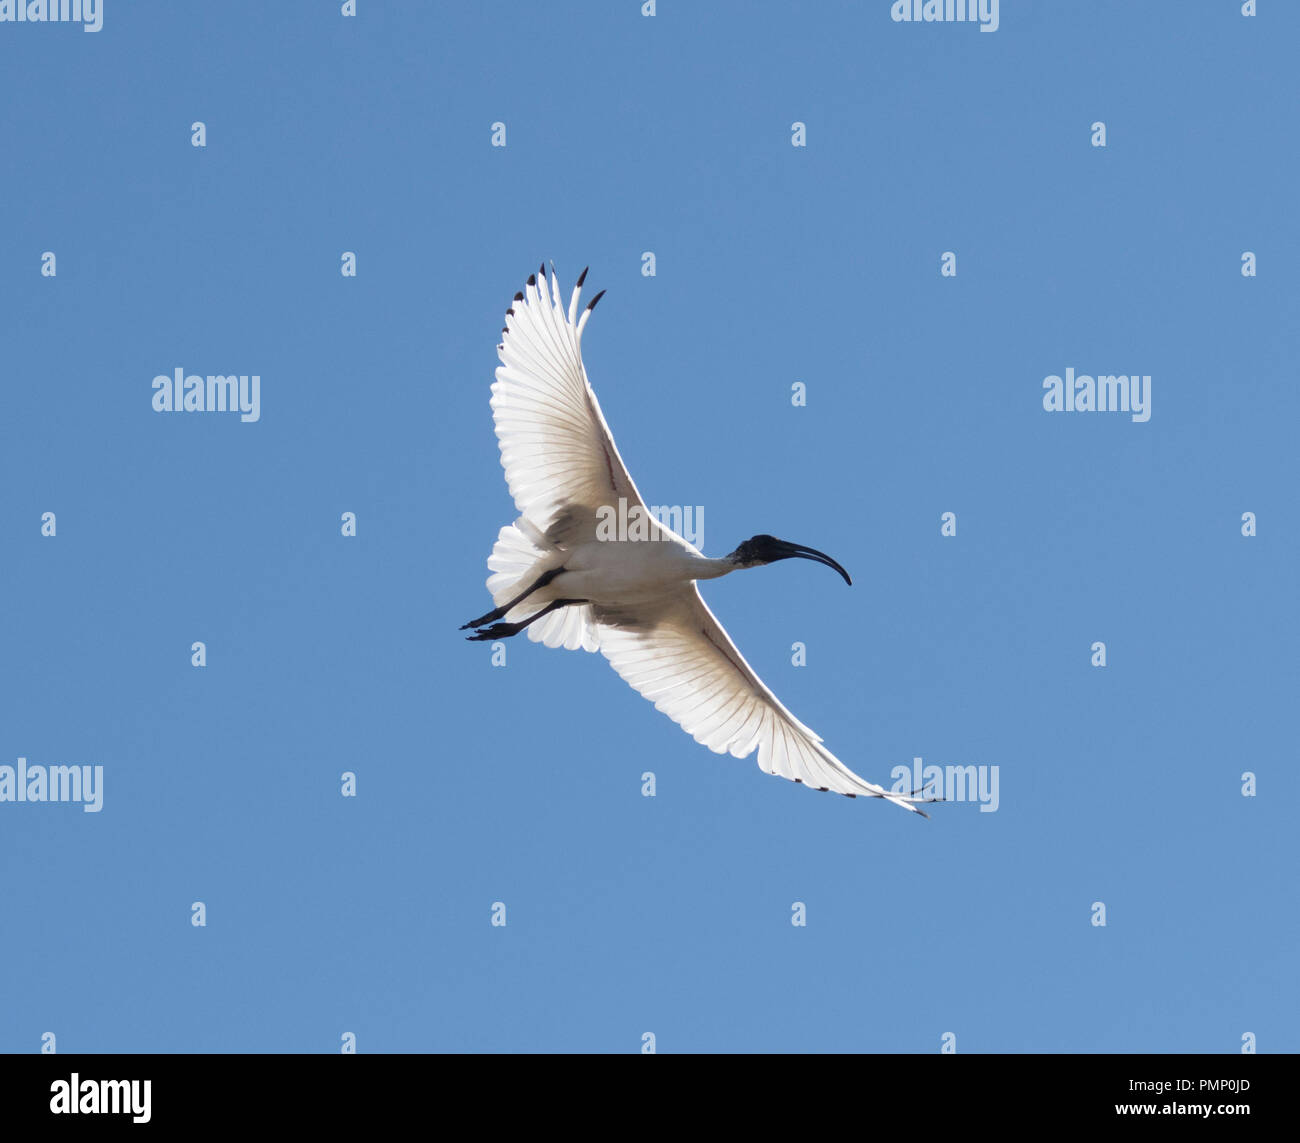 Australian White Ibis (Threskiornis molucca) in flight with wings outstretched, Emu Creek, near Petford, North Queensland, QLD, Australia Stock Photo